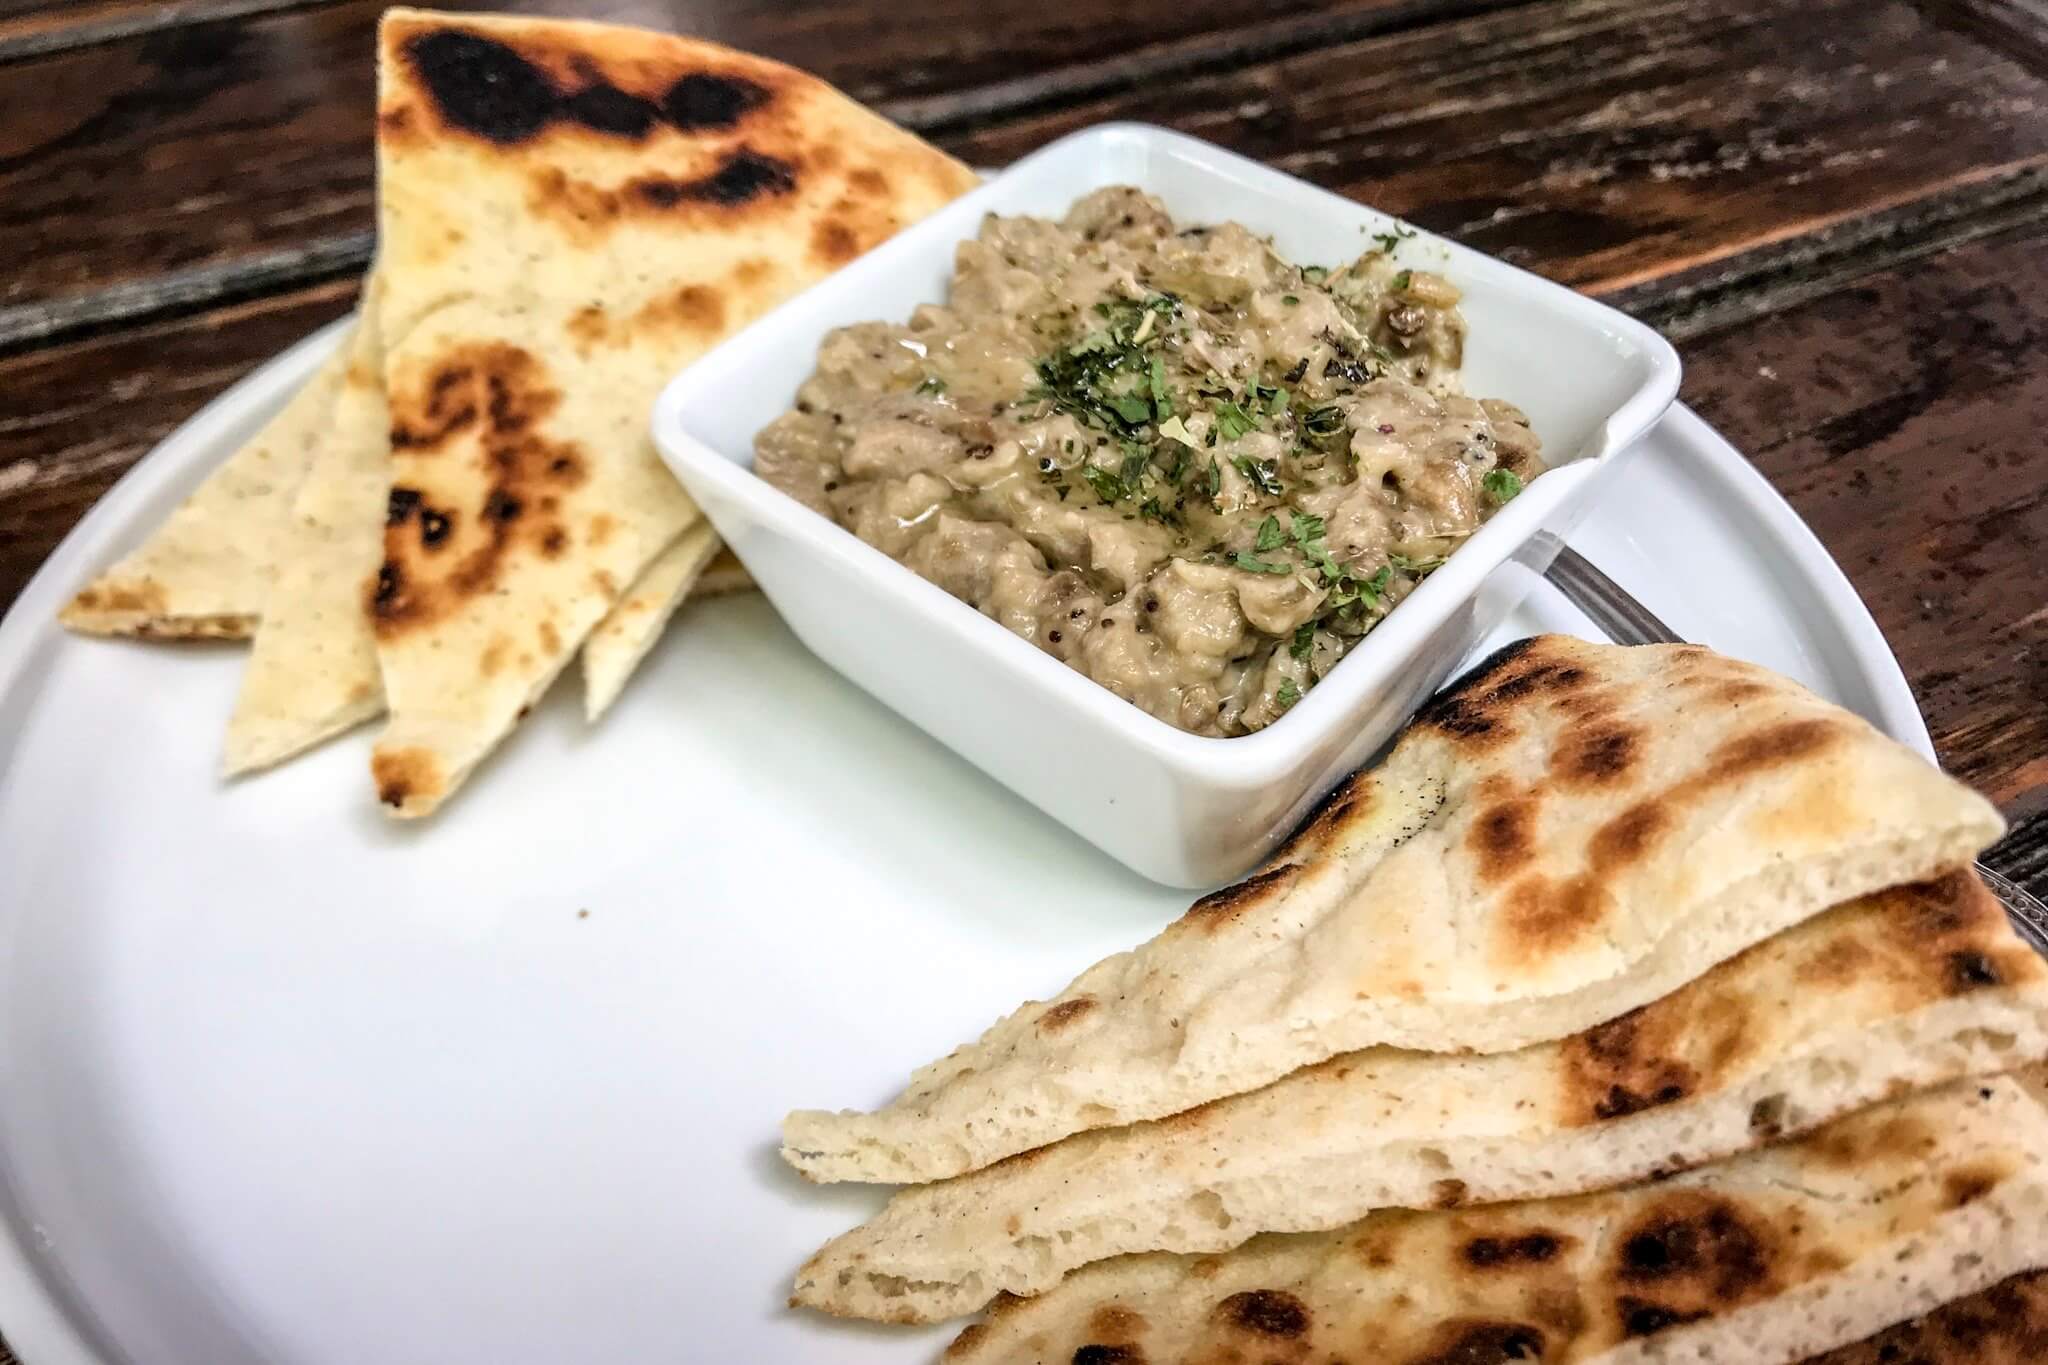 Baba ghanoush appetizer at Turks Kebab in Providenciales, Turks and Caicos